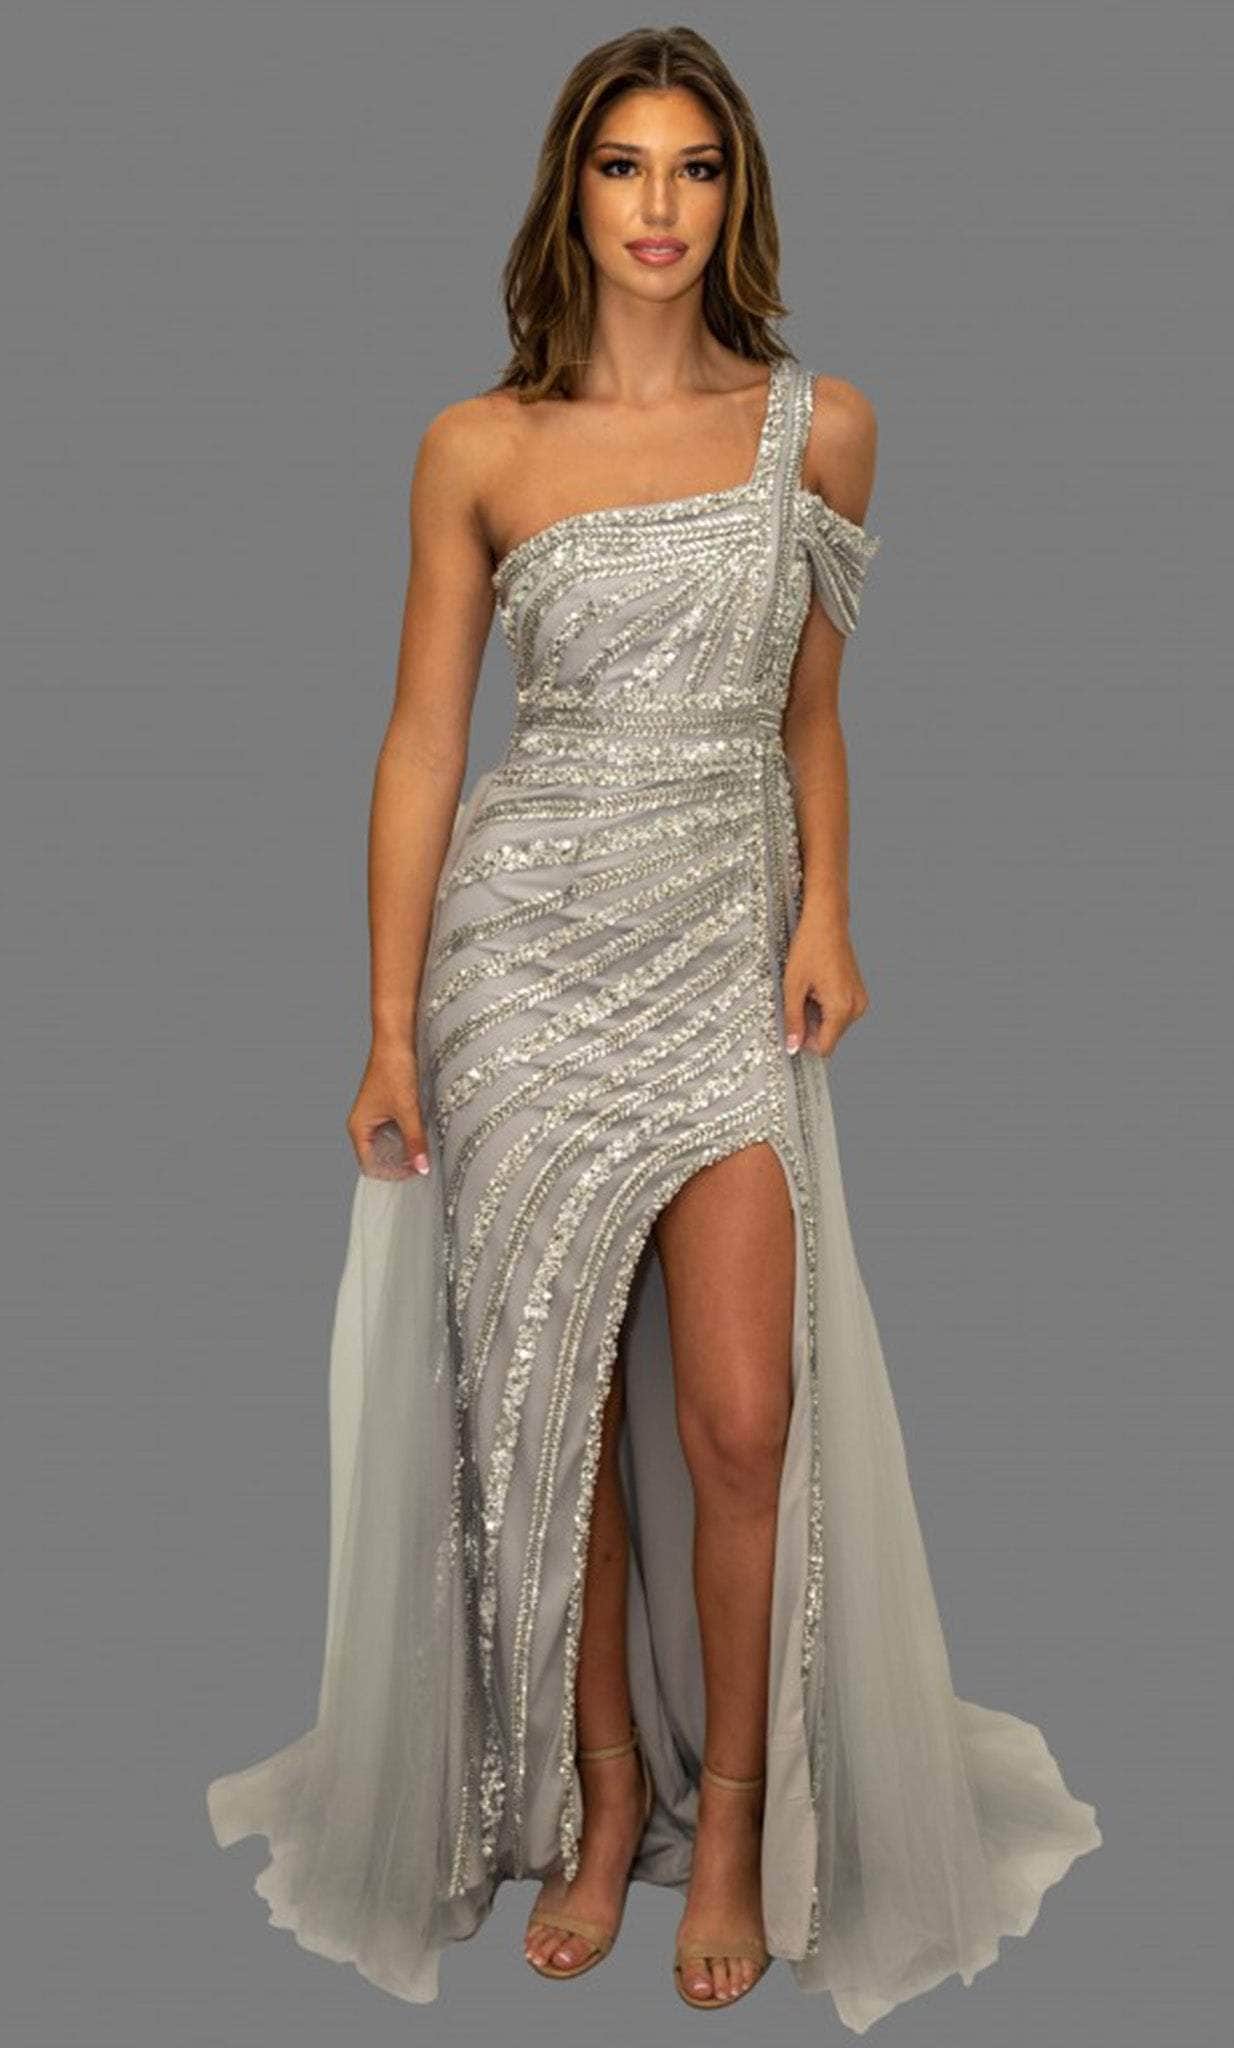 Image of Terani Couture 231GL0376 - One-Sleeve Sequin Embellished Prom Dress